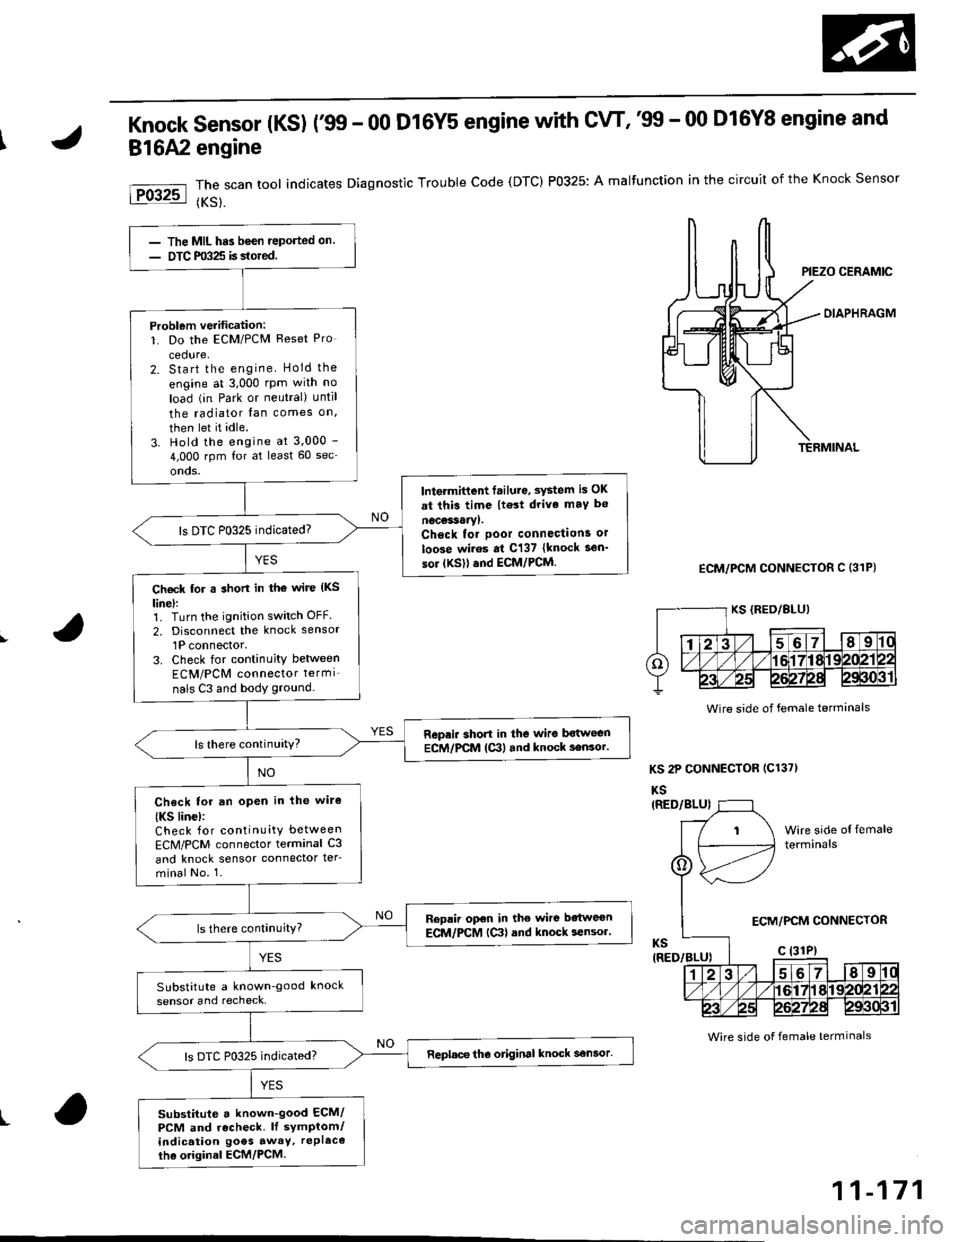 HONDA CIVIC 1996 6.G Service Manual Knock sensor (Ks) r99 - 00 D16Y5 engine with cw, 99 - 00 D16Y8 engine and
816A2 engine
The scan tool indicates Diagnostic Trouble Code (DTC) P0325: A malfunction in the circuit of the Knock Sensor
{K